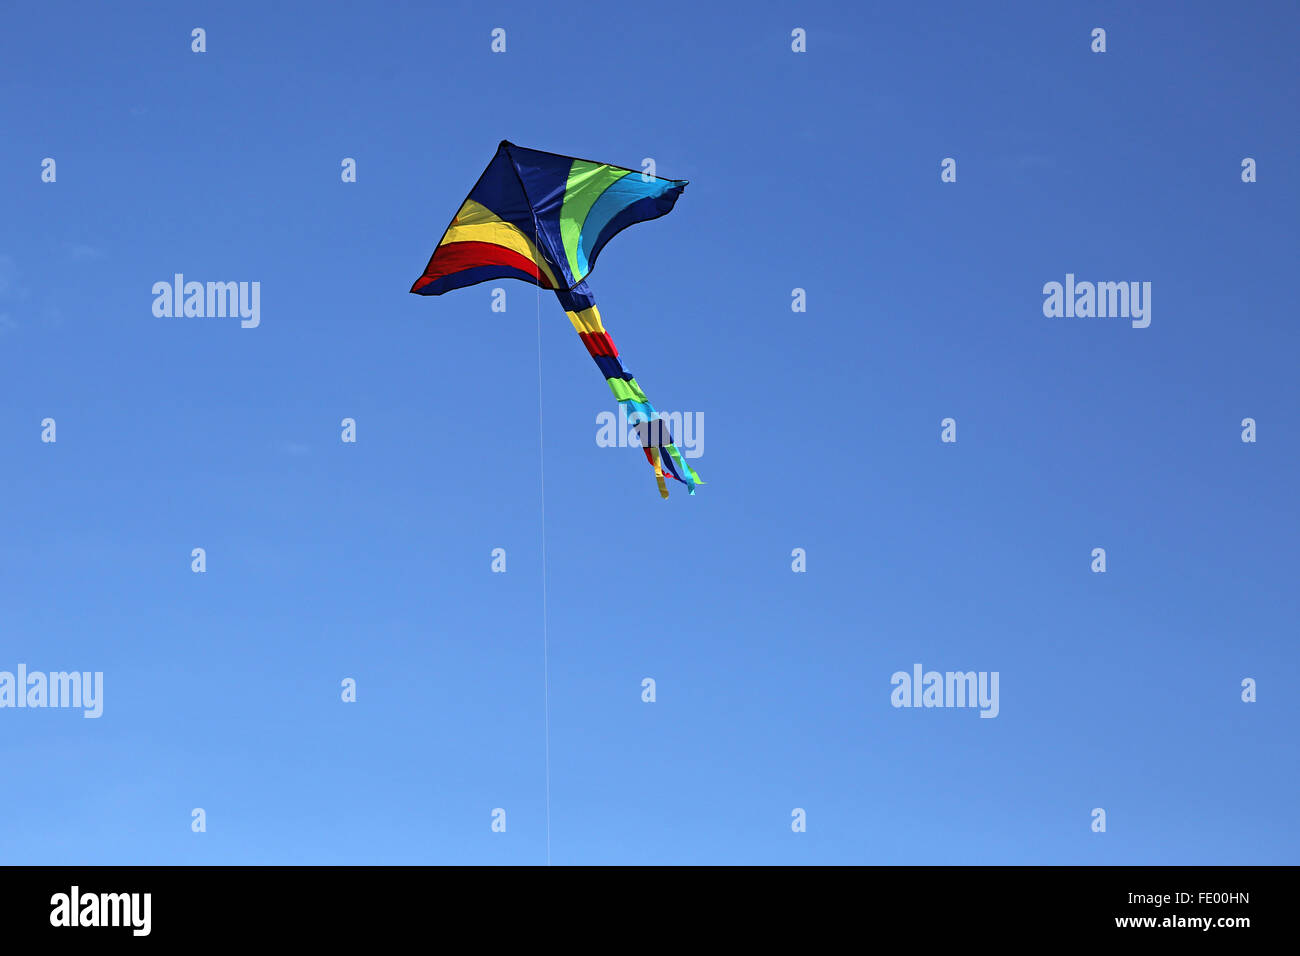 Berlin, Germany, a kite in the air Stock Photo